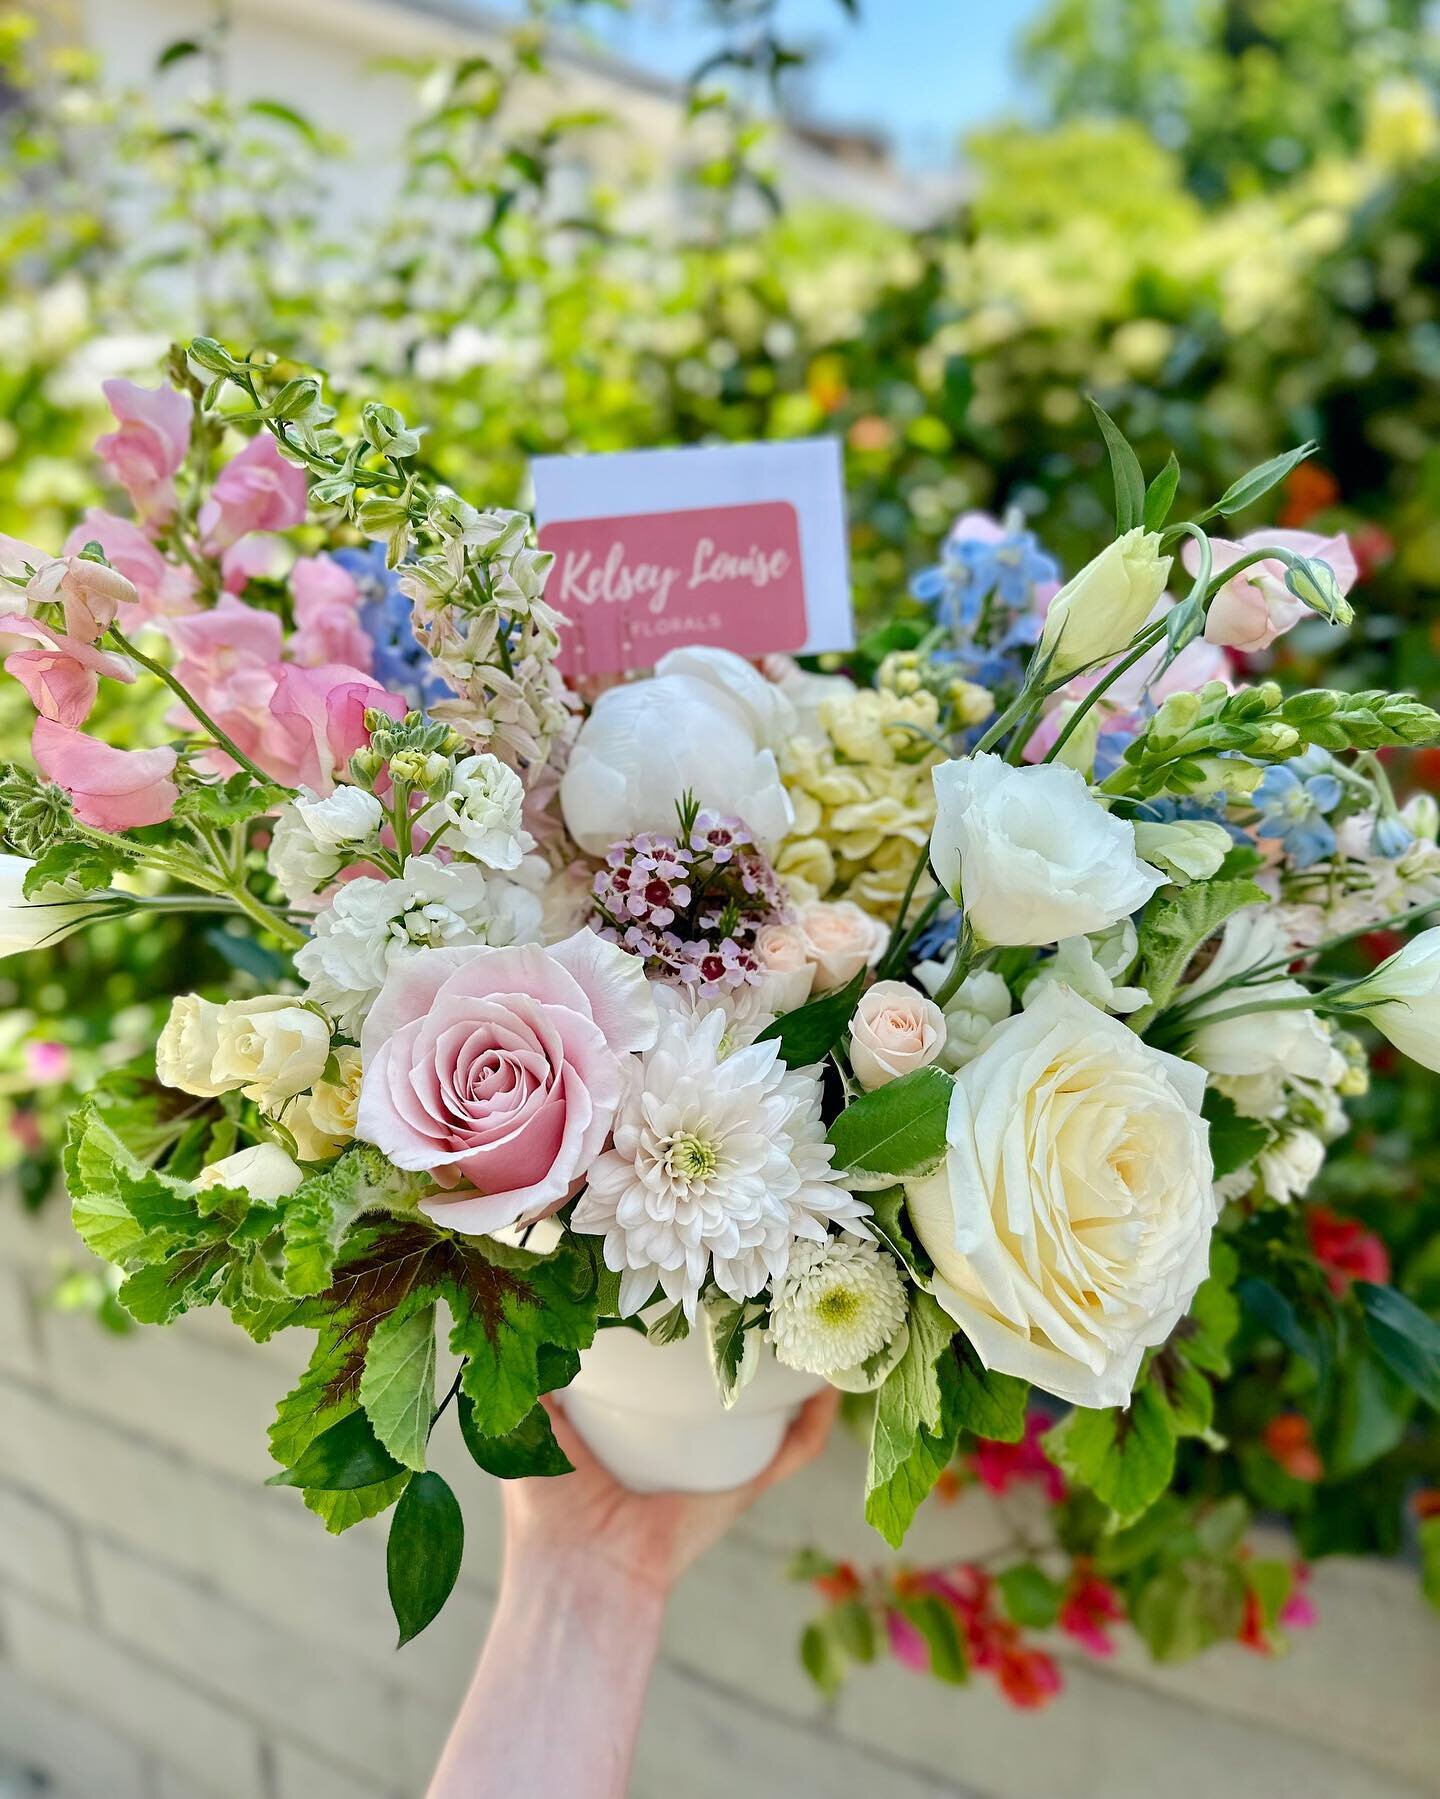 And that&rsquo;s a wrap on Mother&rsquo;s Day blooms! 🎀 Sending extra love to ALL kinds of Moms today ~ you truly make our world go round 🌍